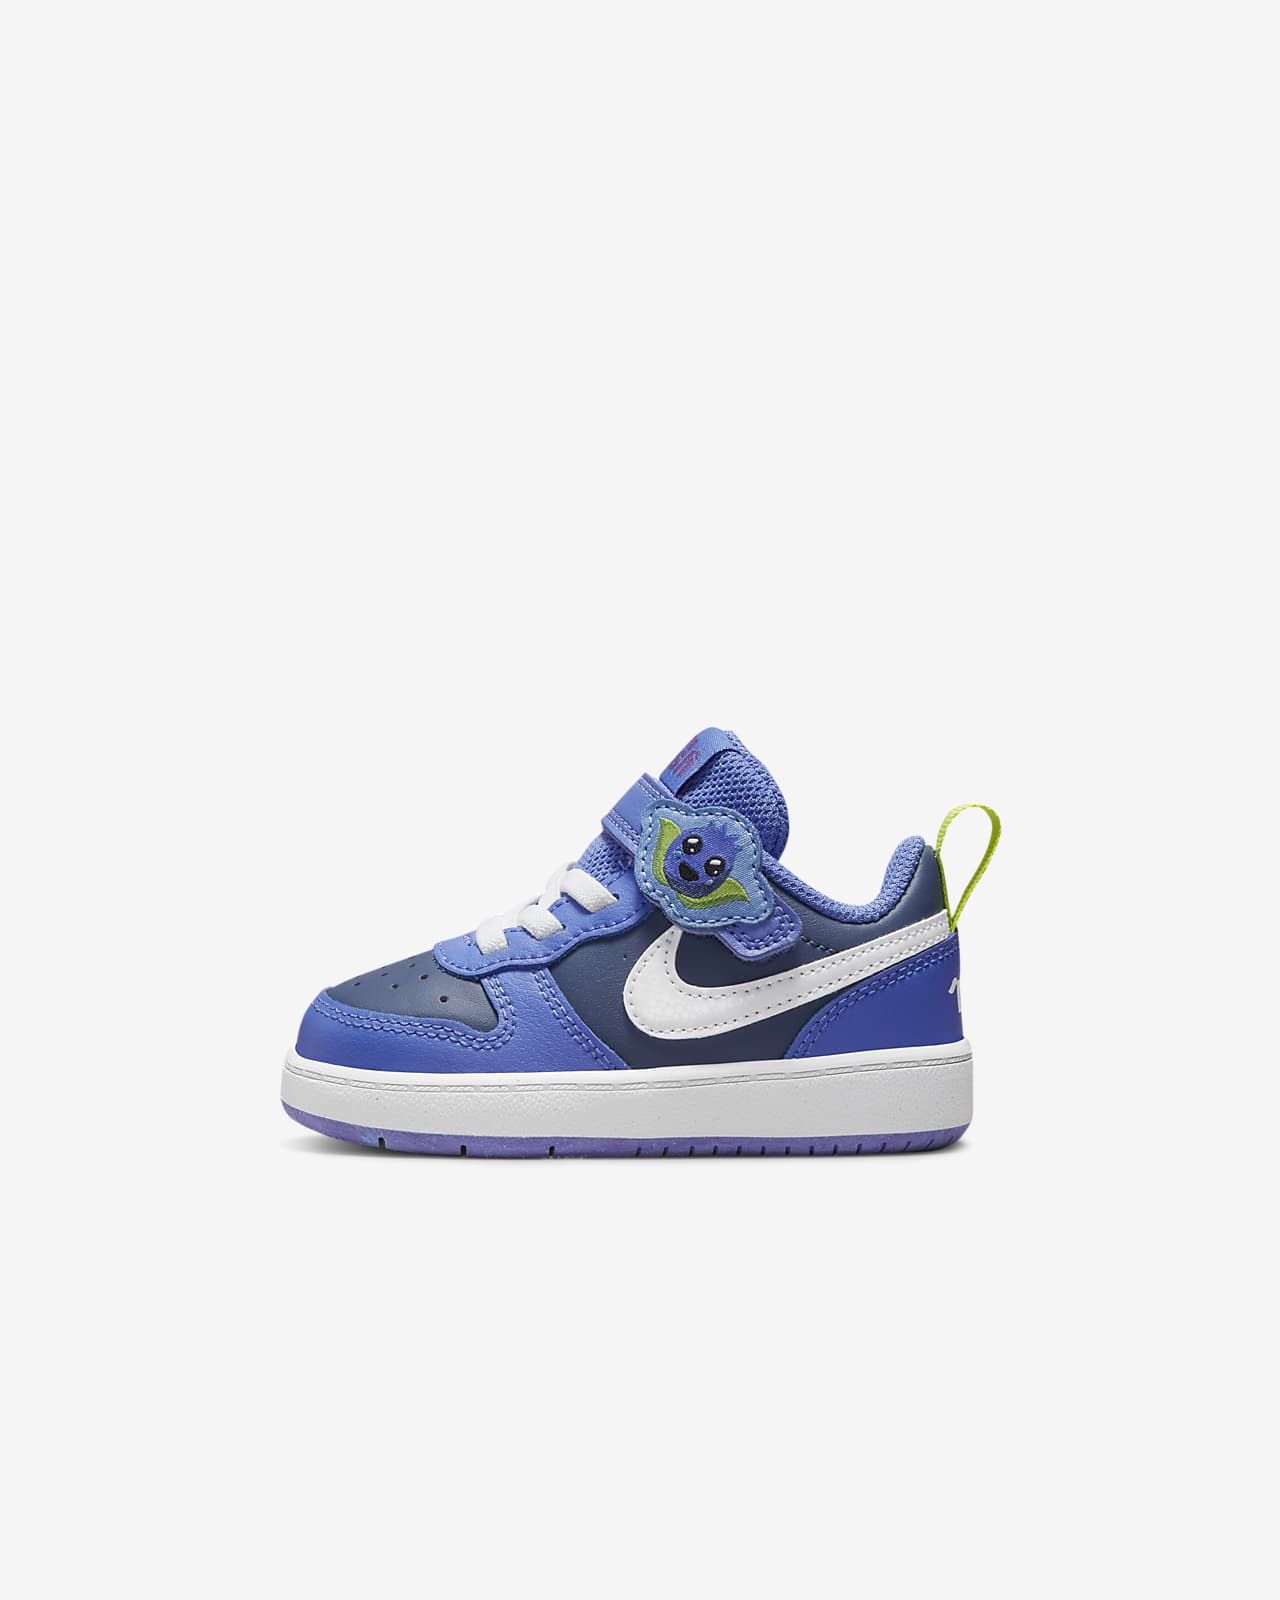 Nike Court Borough Low 2 Lil Fruits Baby/Toddler Shoes